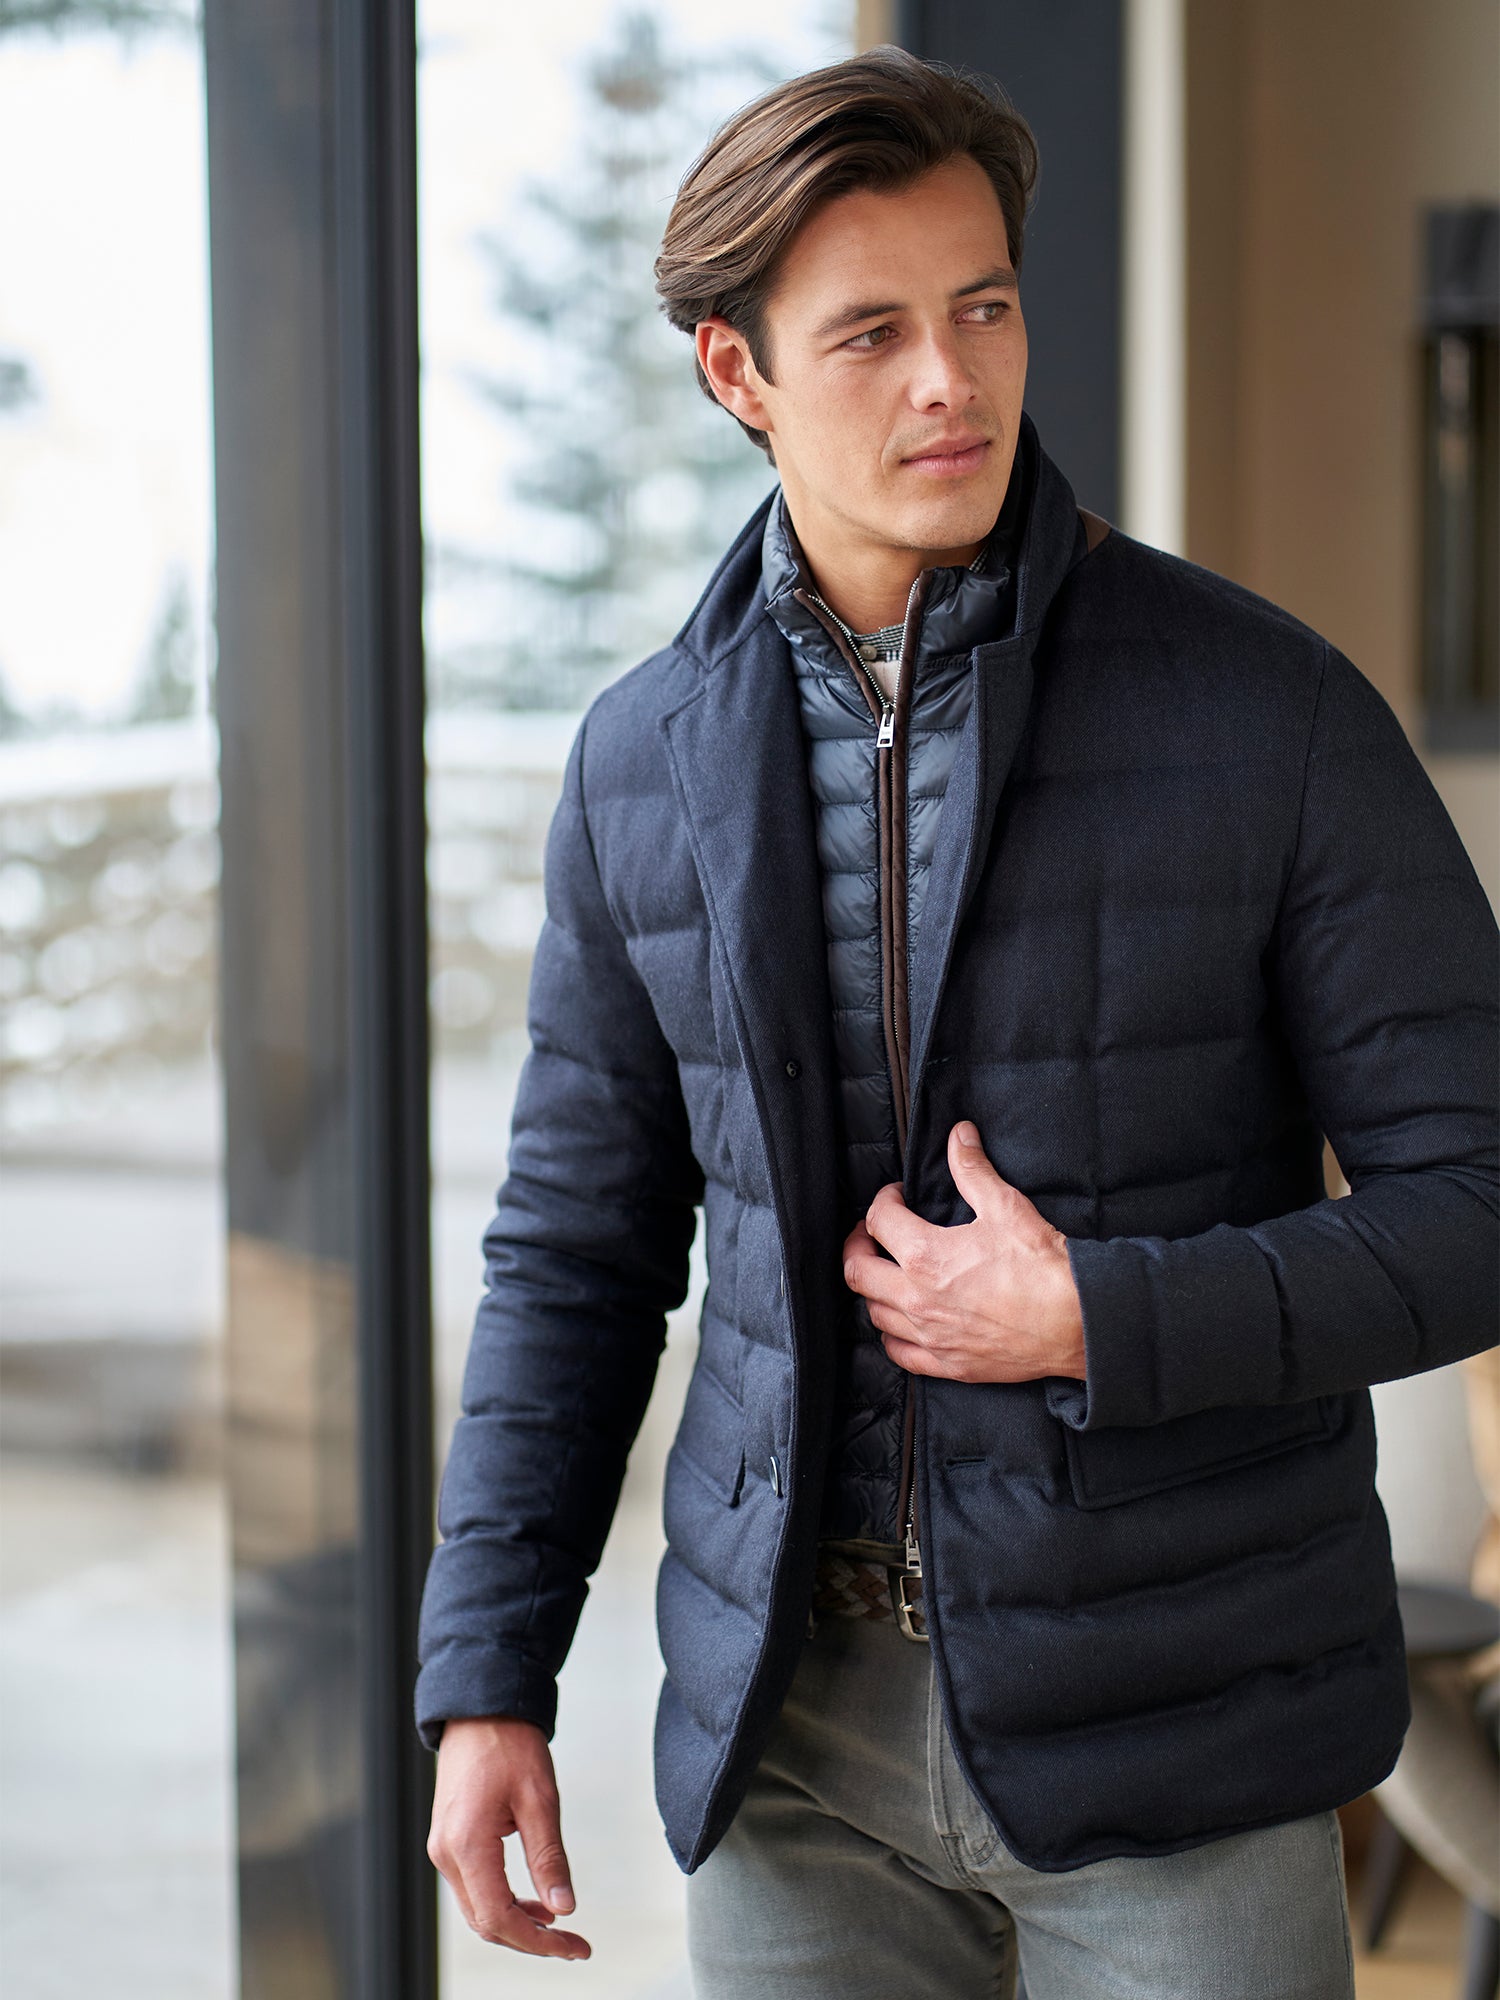 The Cashmere Down Jacket